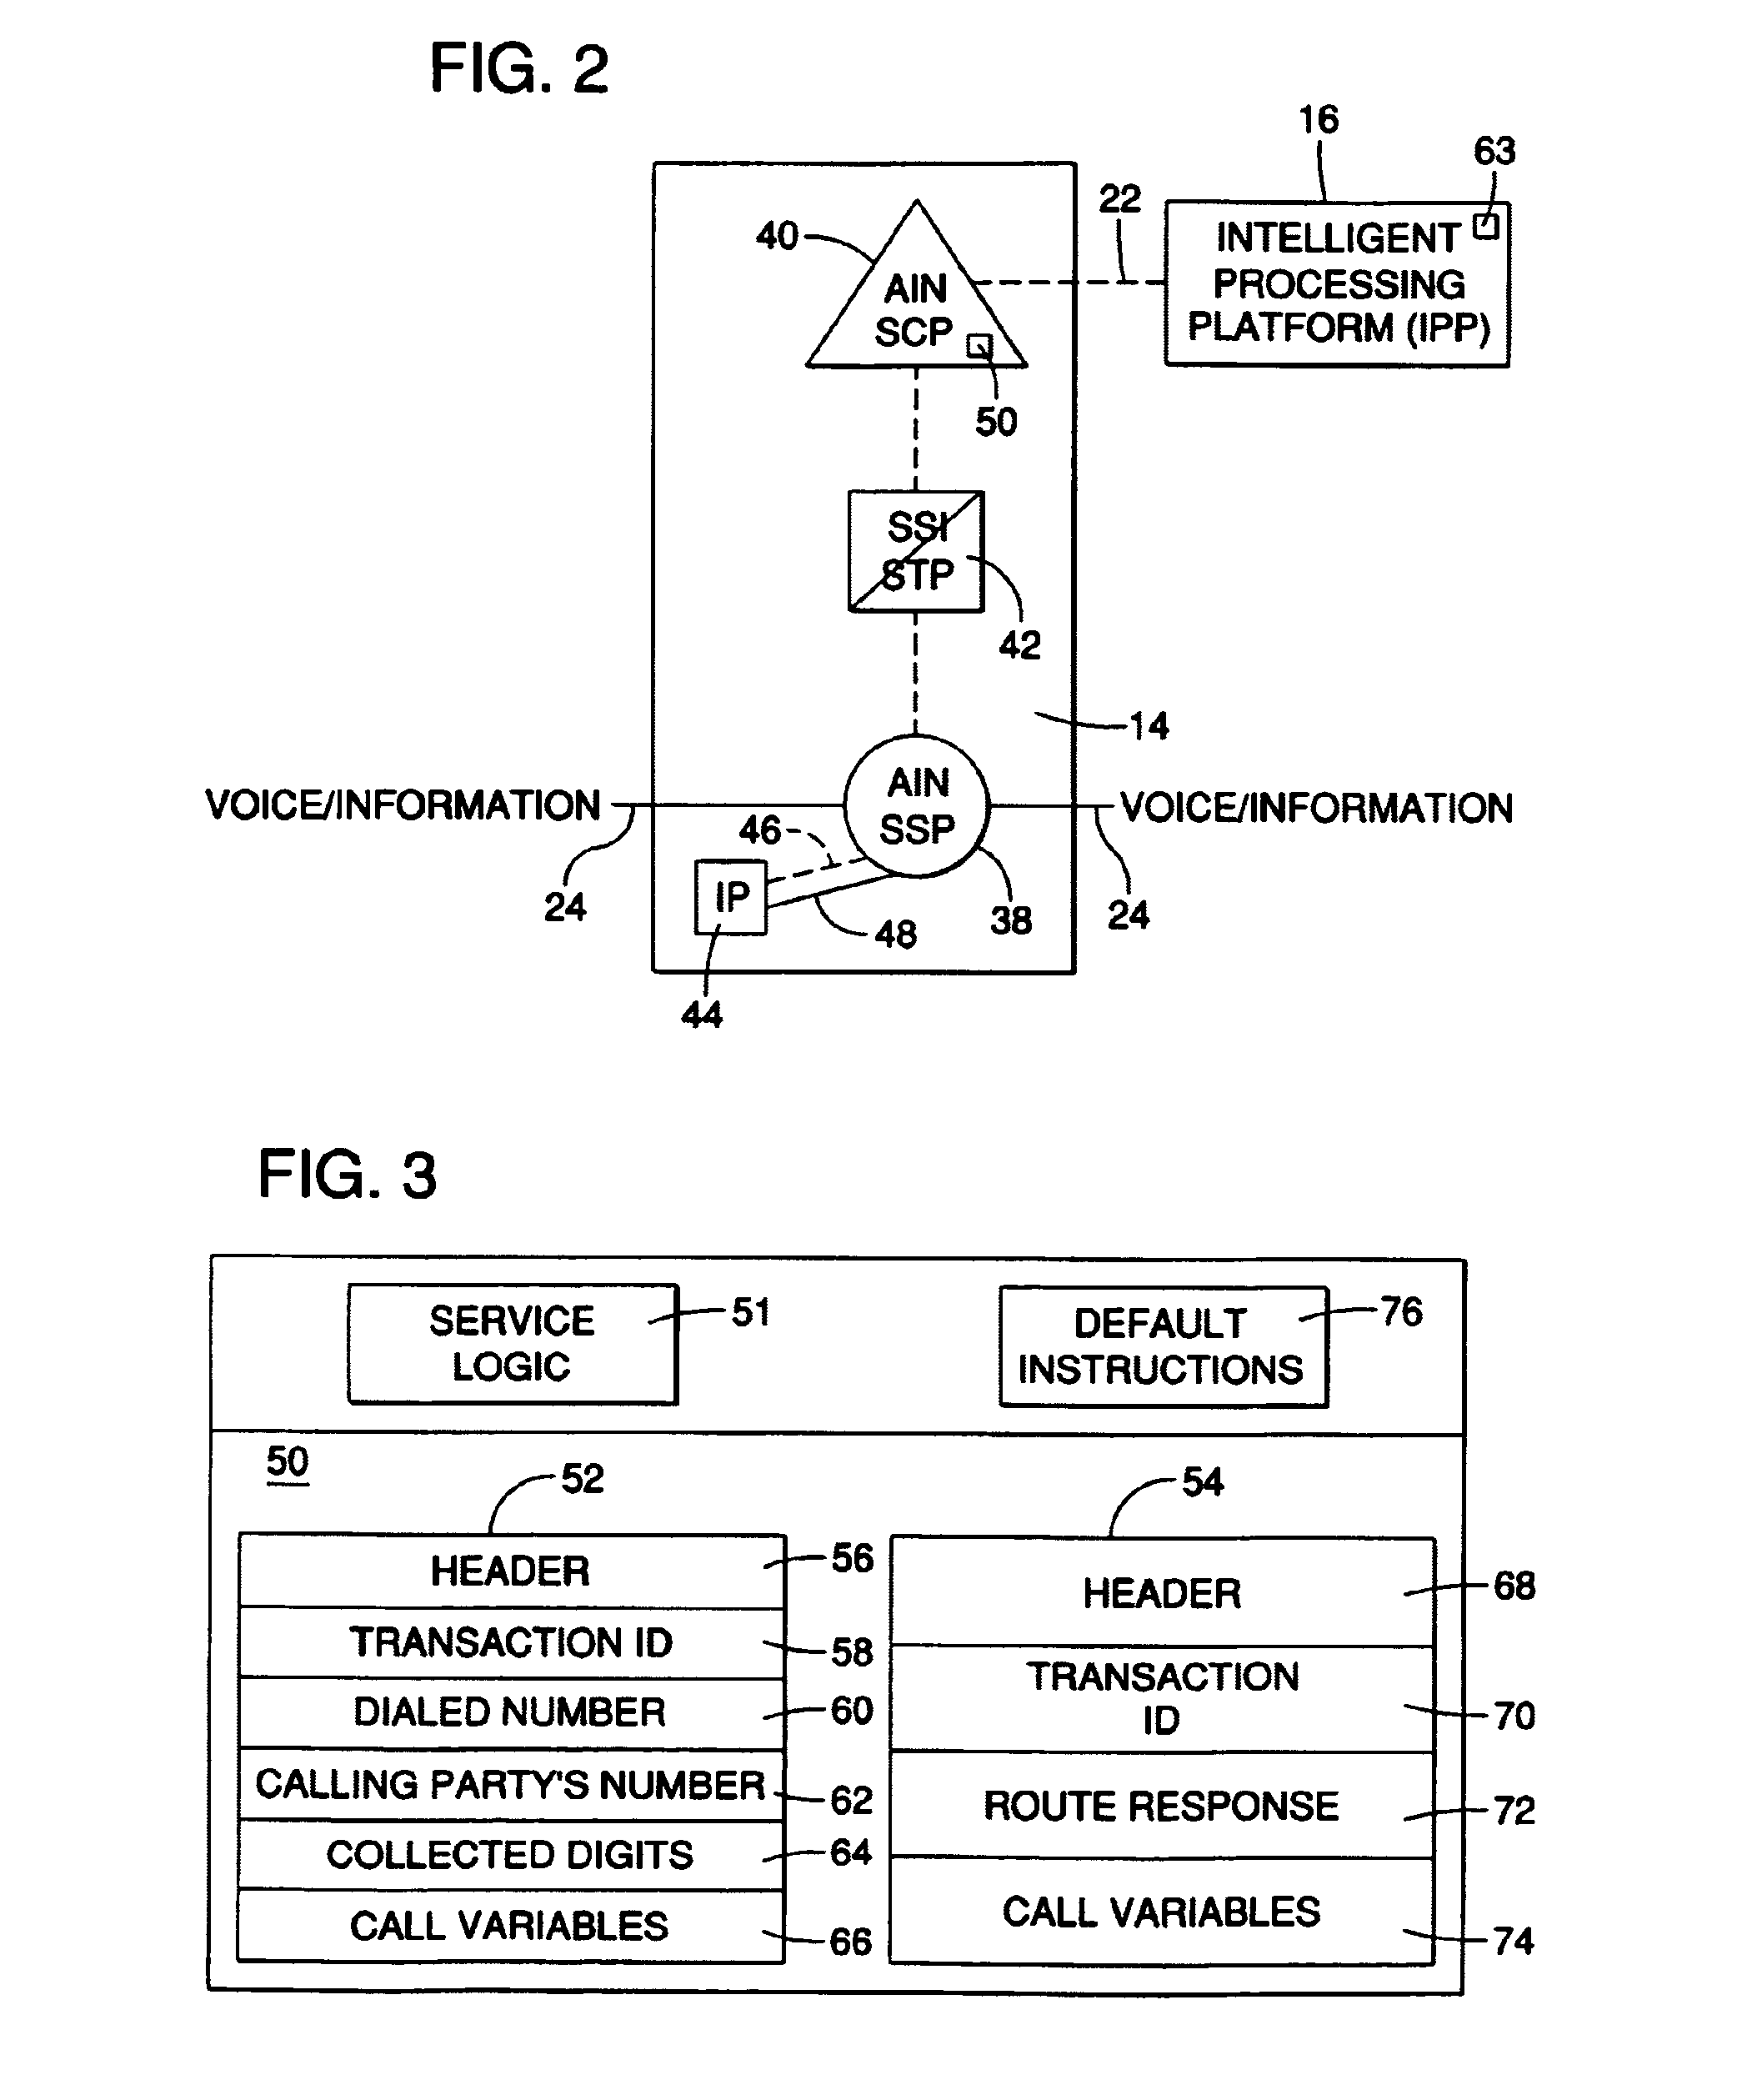 System and method for routing both toll-free and caller-paid telephone calls to call service centers